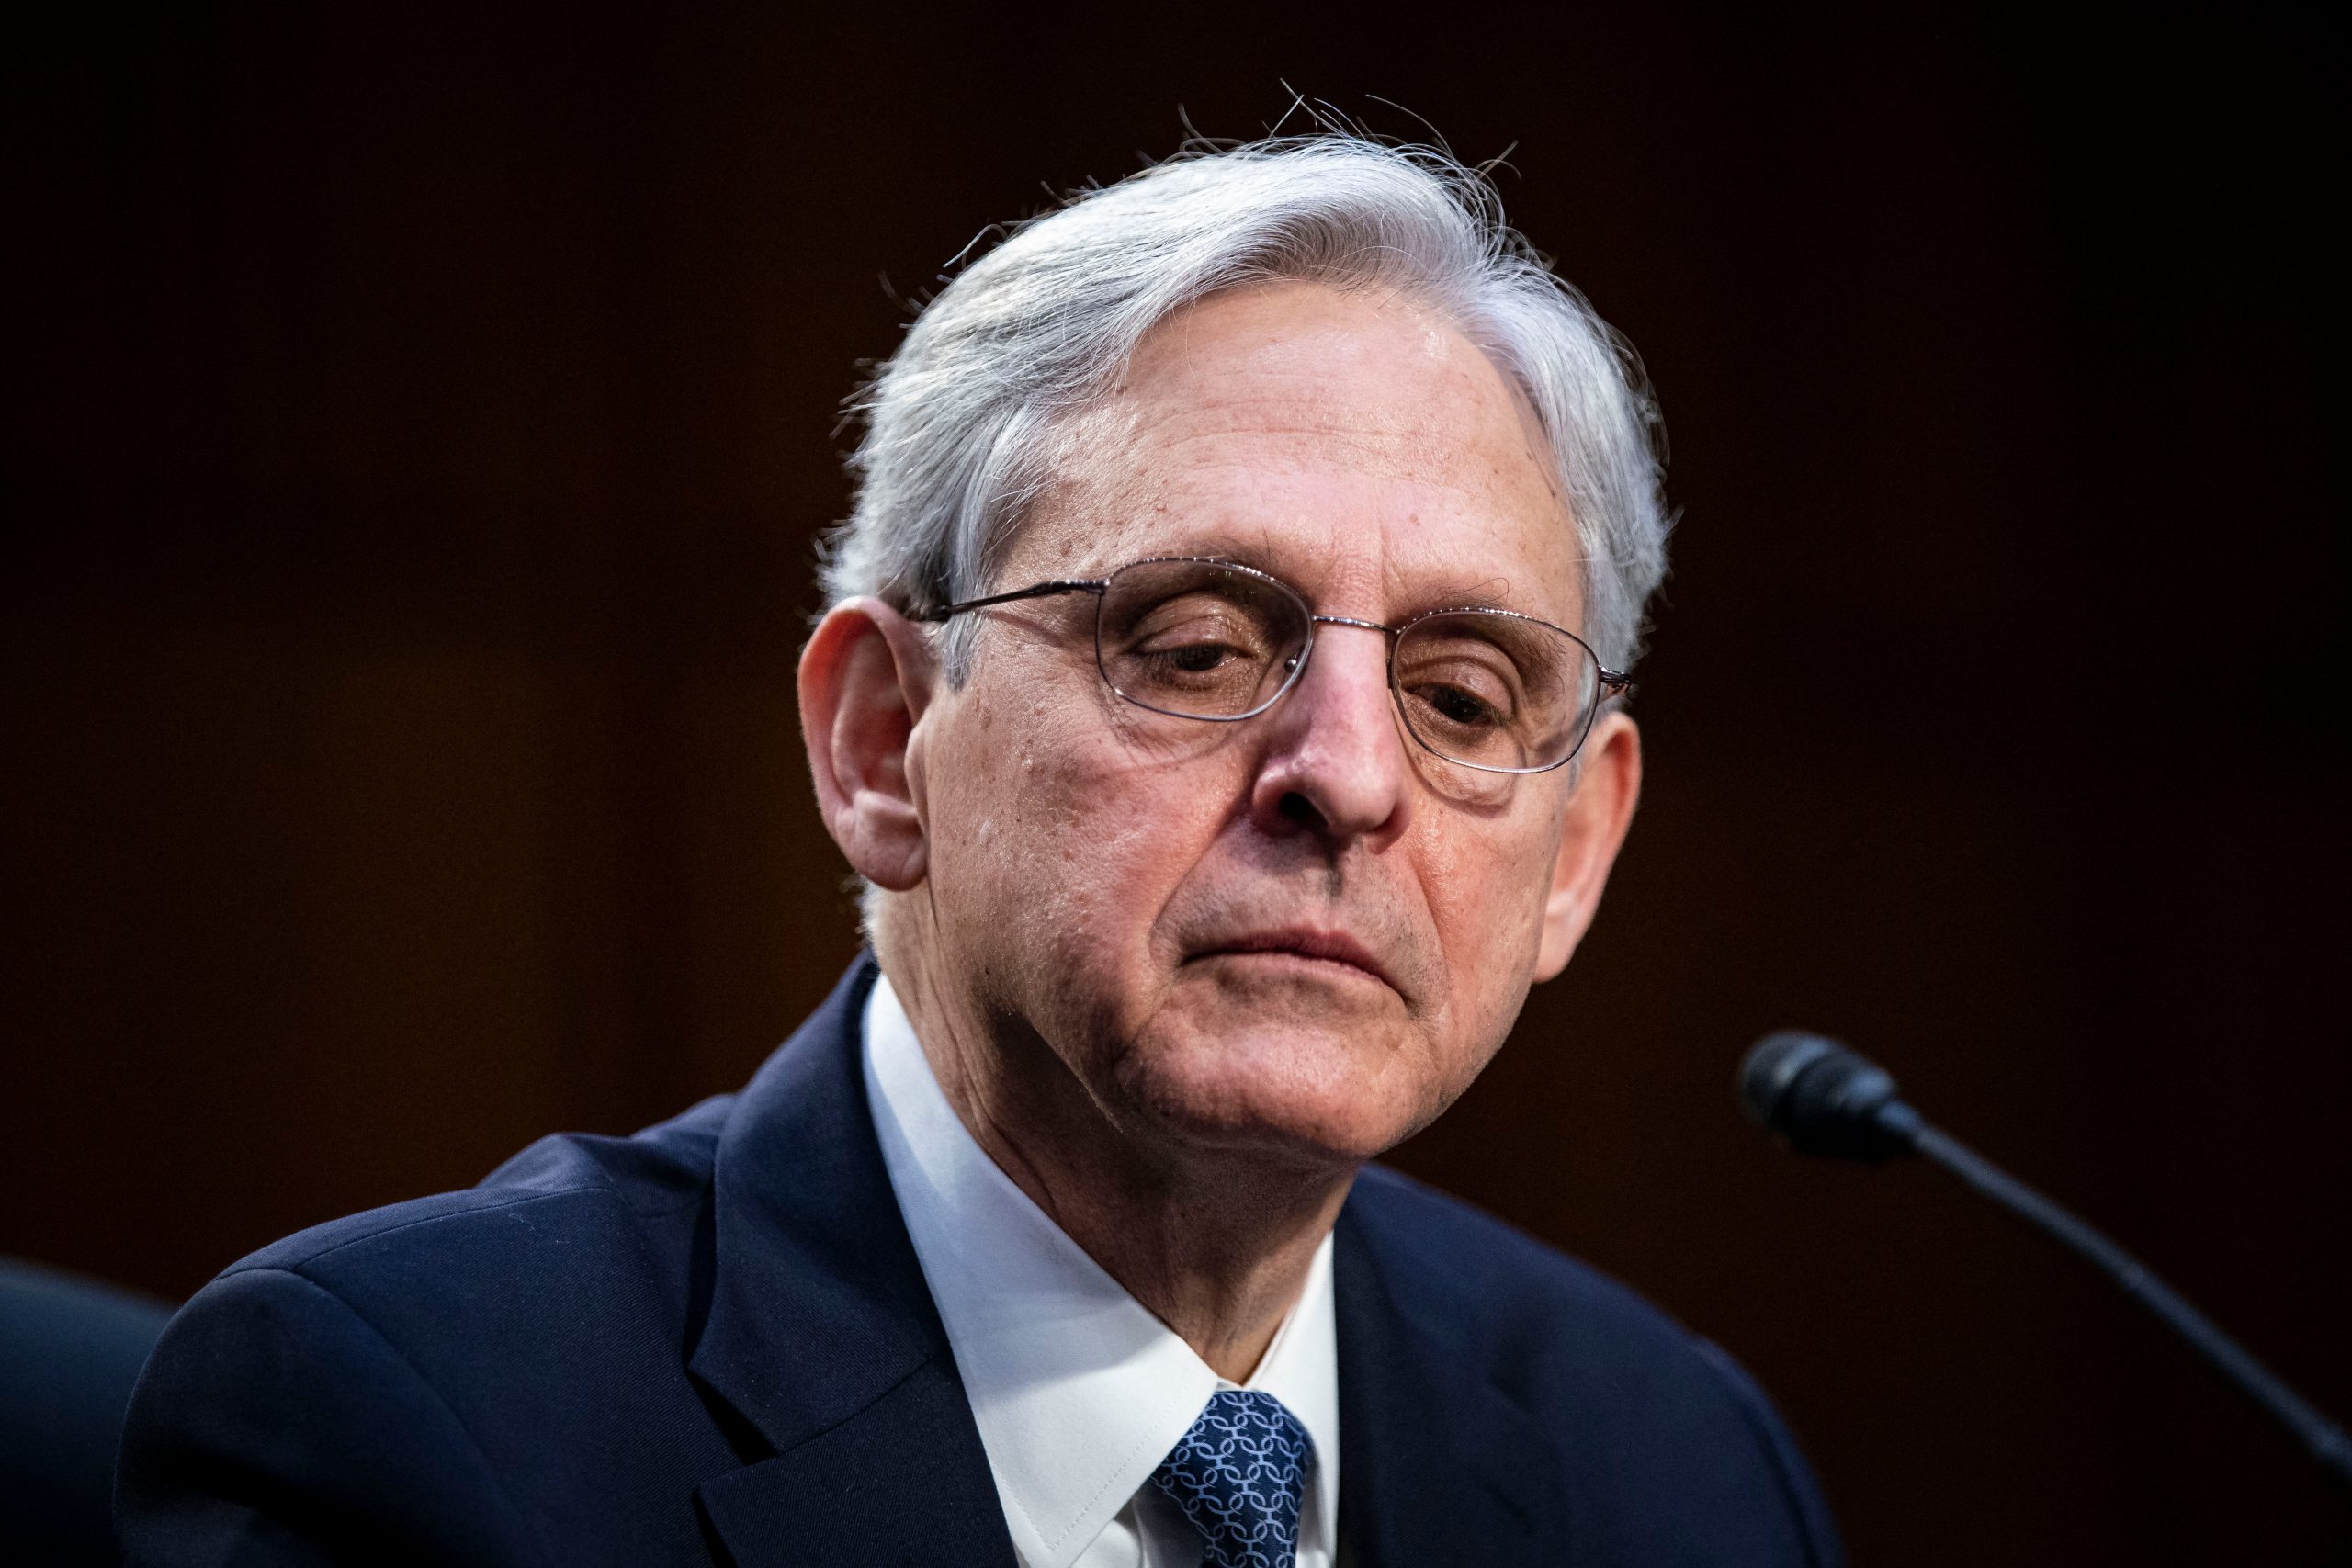 Will Merrick Garland prosecute Donald Trump? Netizens call on AG after January 6 committee’s referral